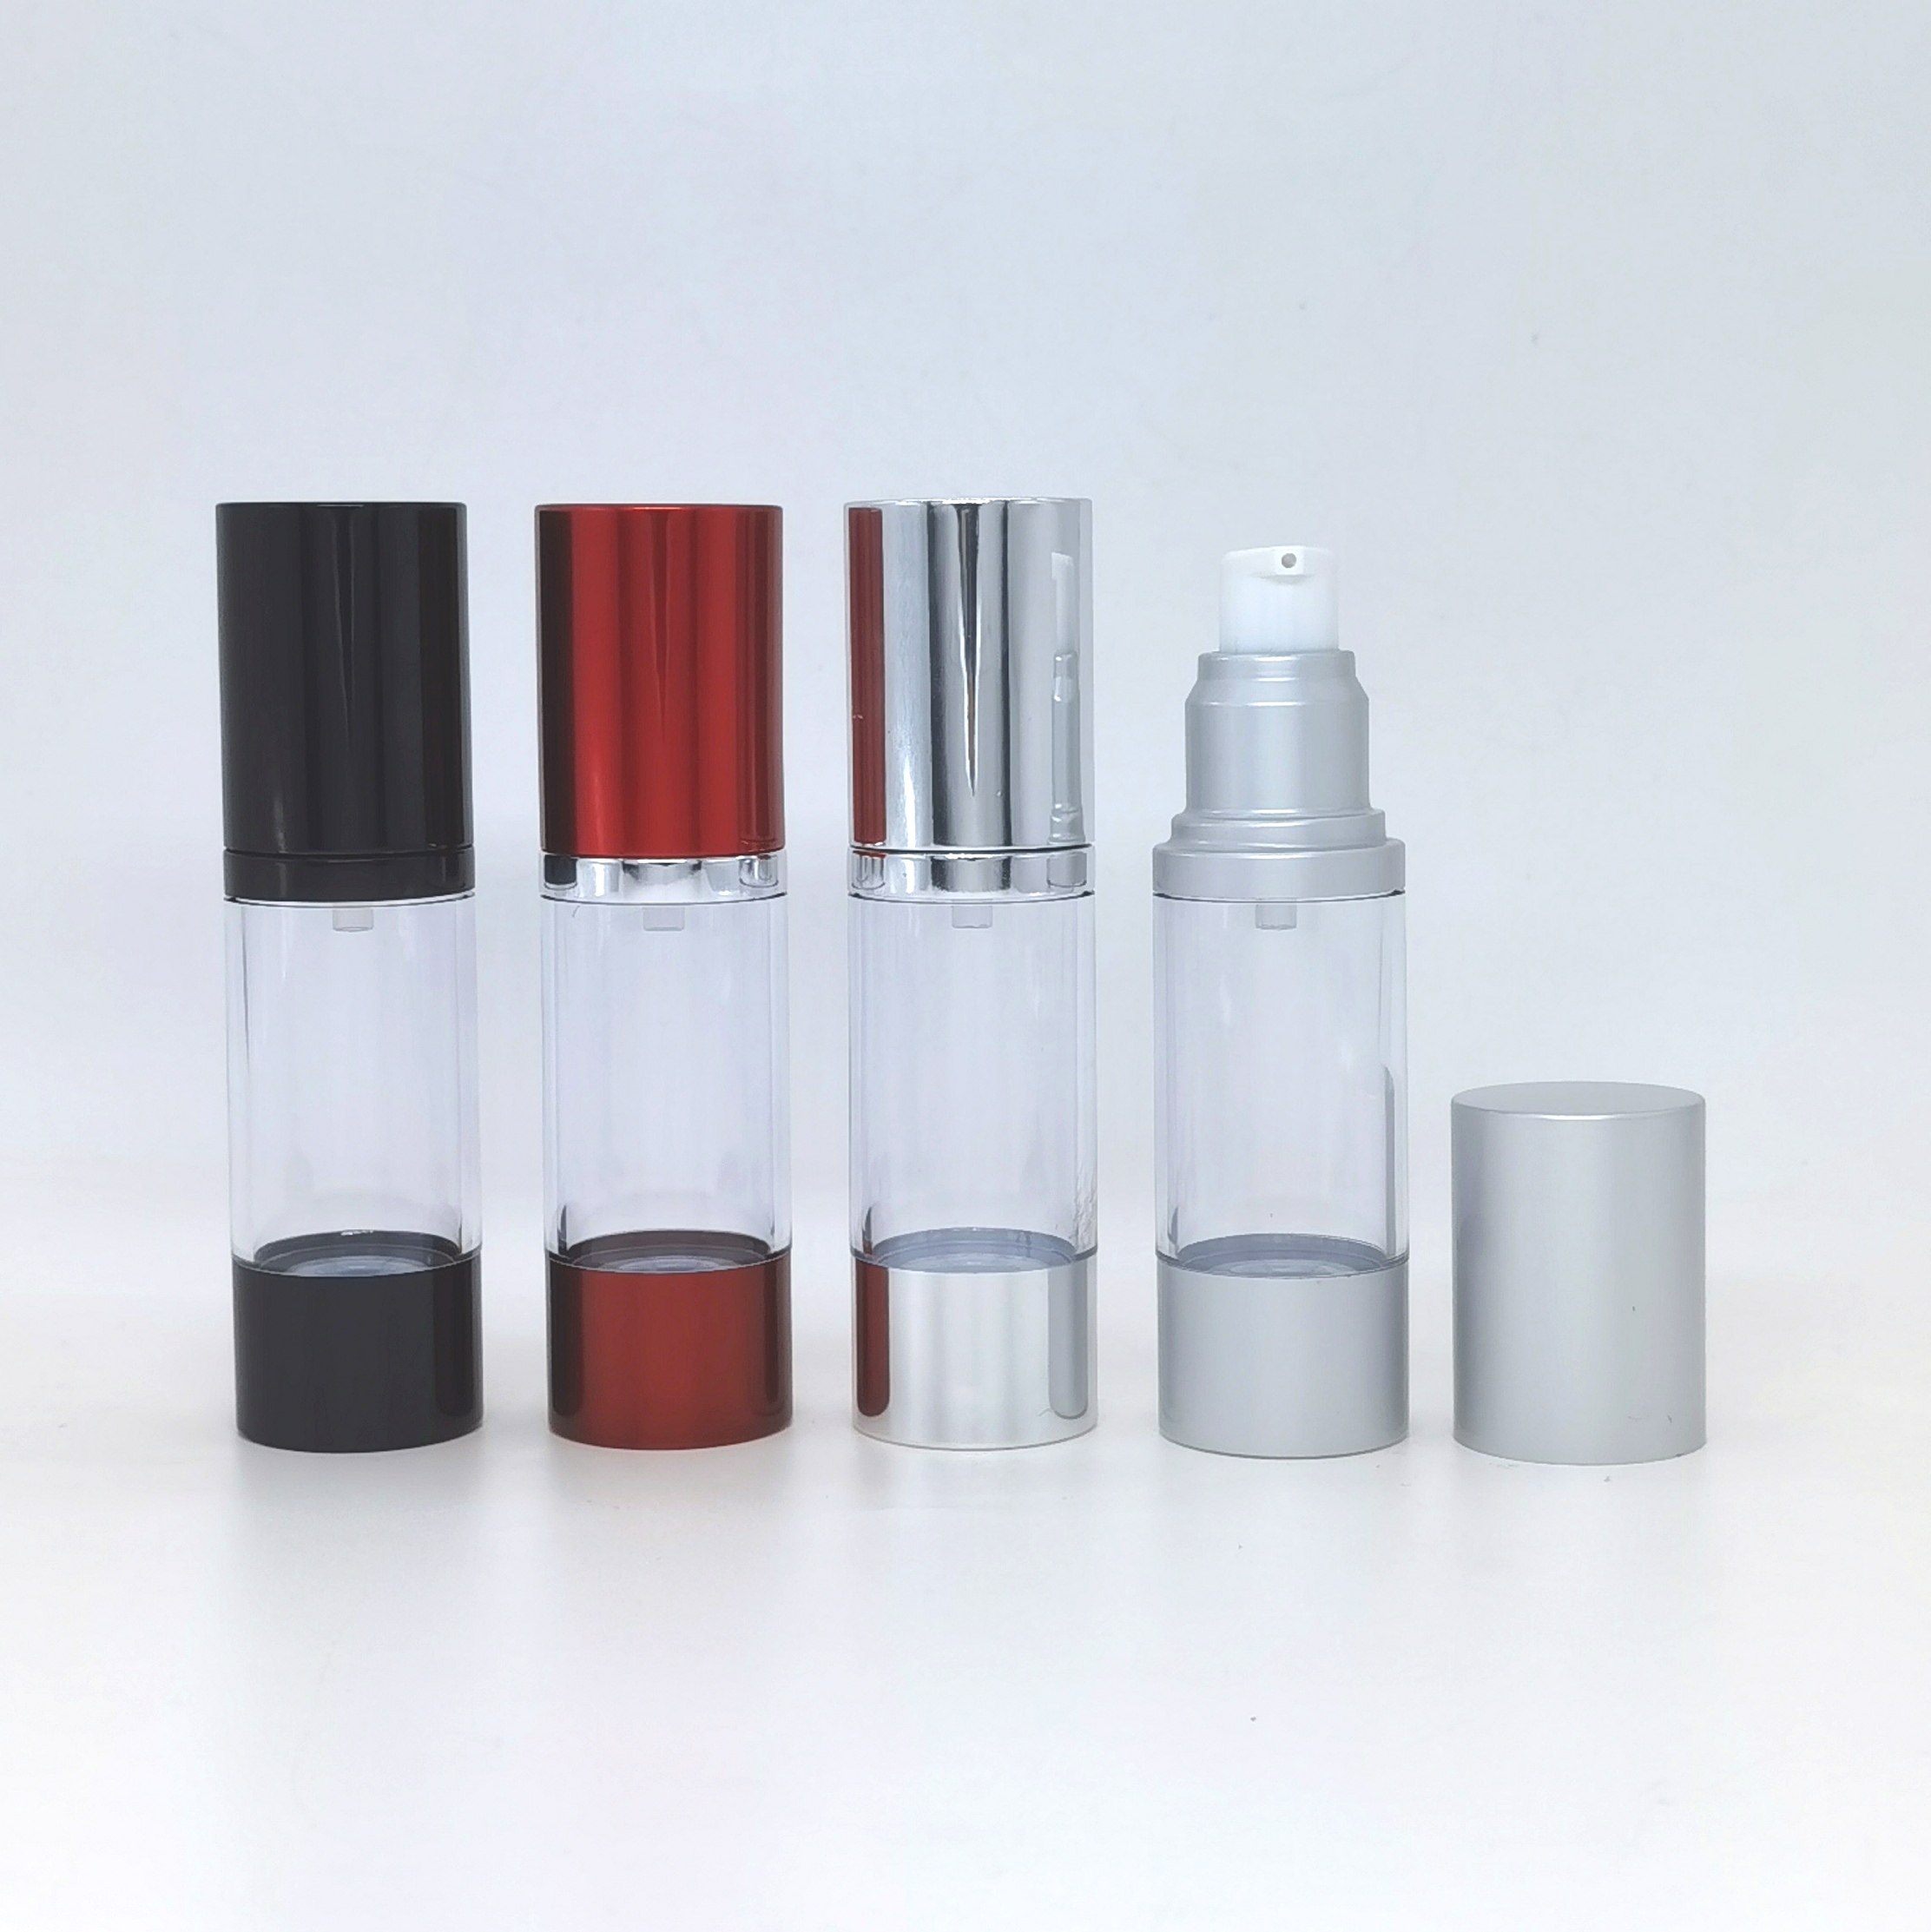 Inventory of the benefits of cosmetic airless bottles